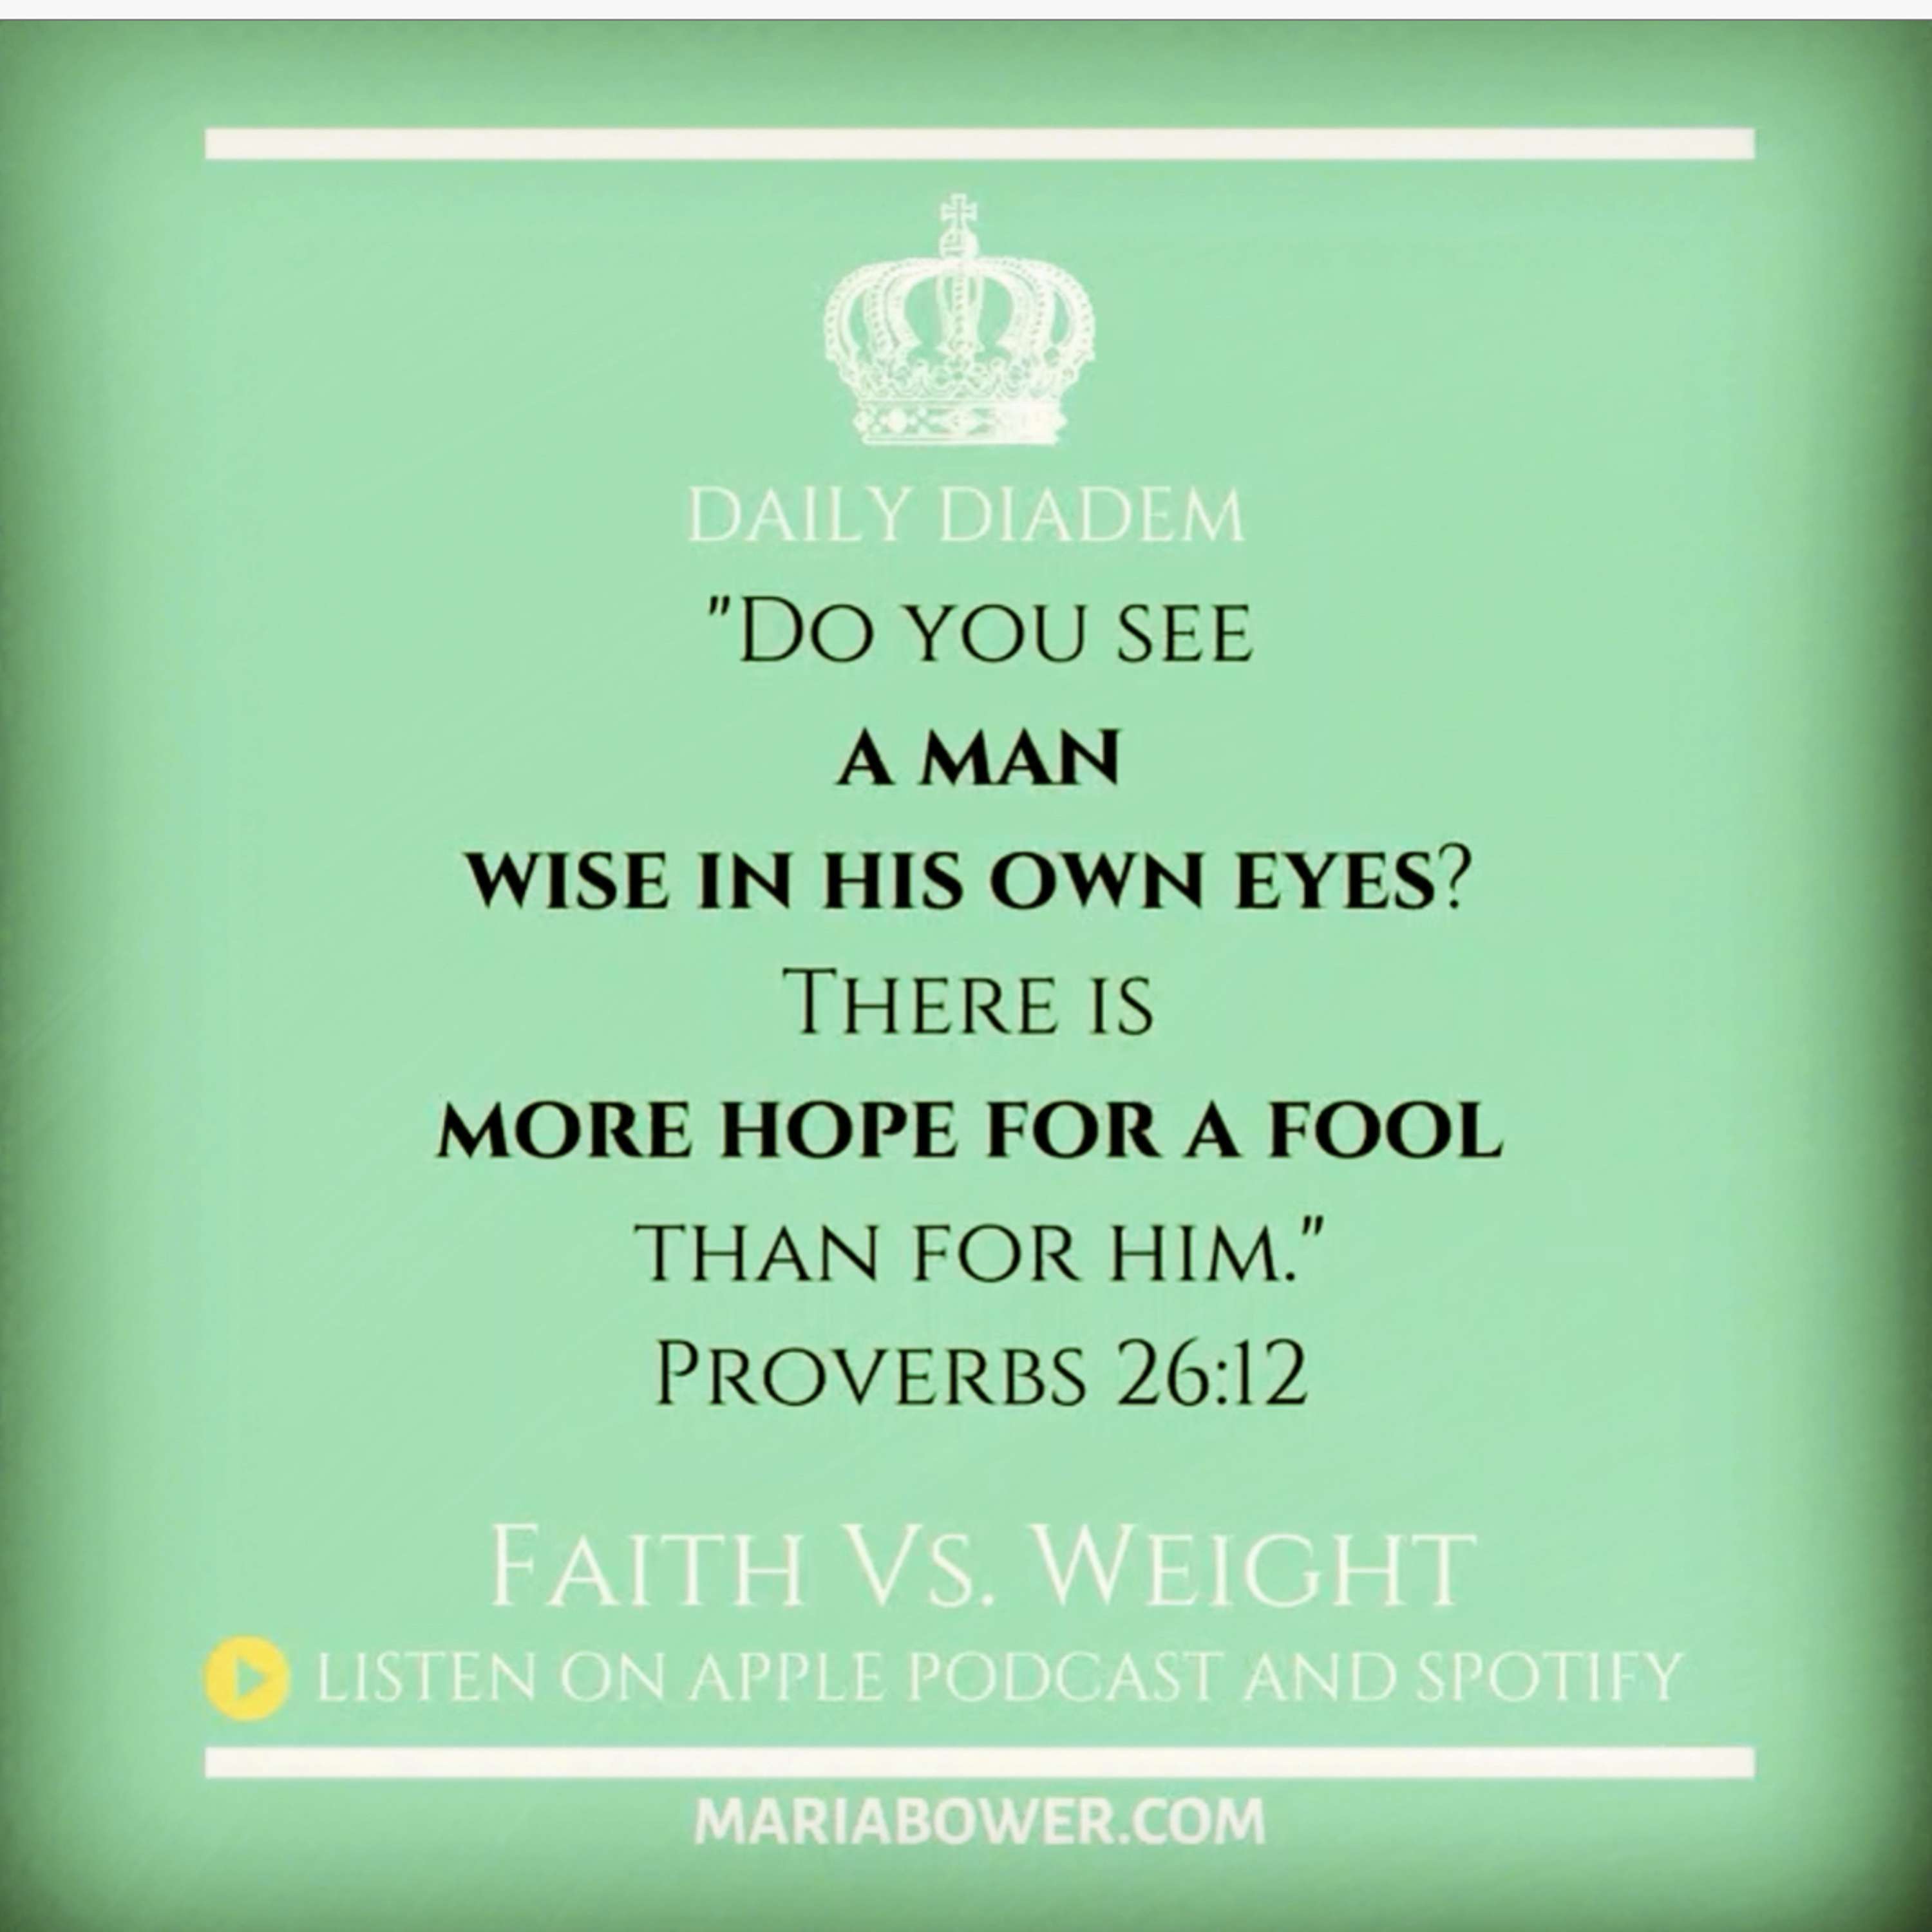 DAILY DIADEM: ARE YOU WISE IN YOUR OWN EYES?